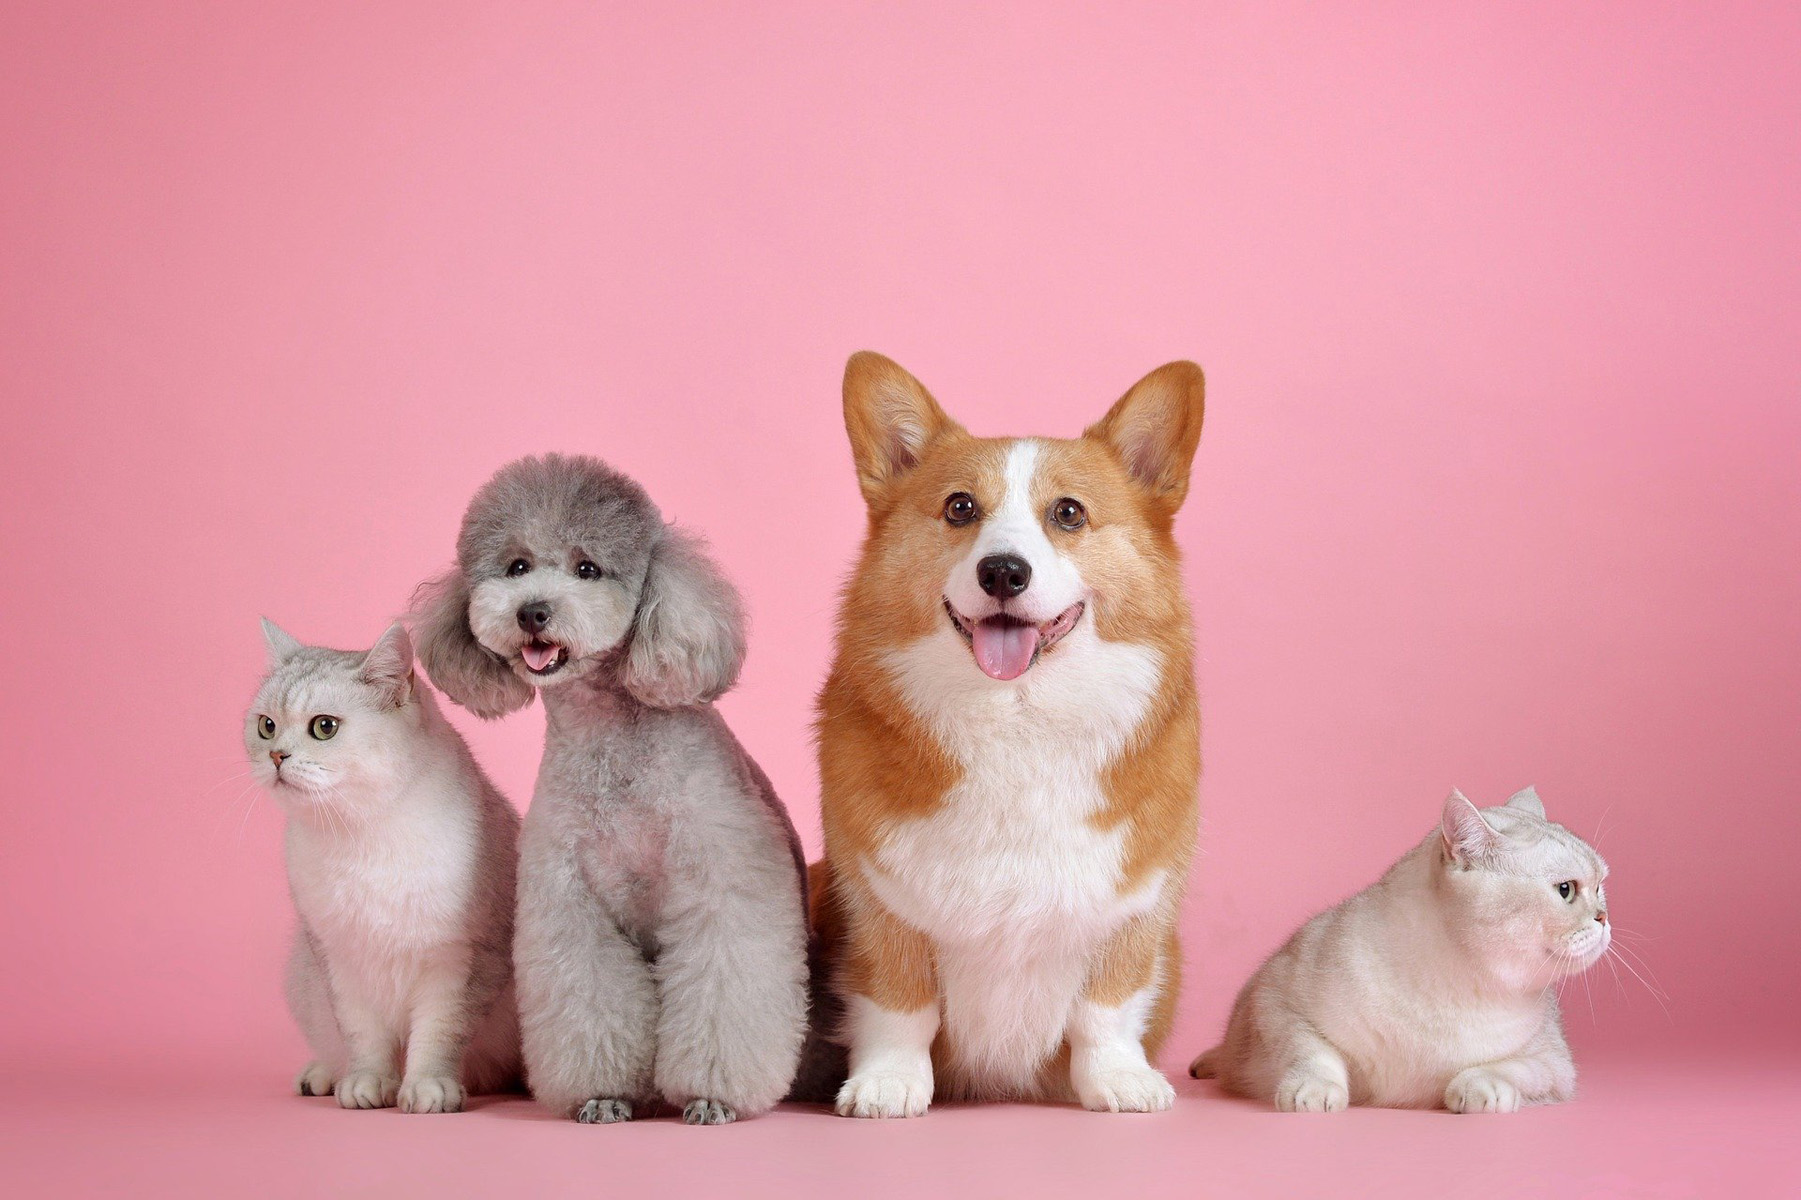 042_two_white_cats_a_gray_poodle_and_a_corgi_sitting_in_a_row_against_a_pink_background.jpg